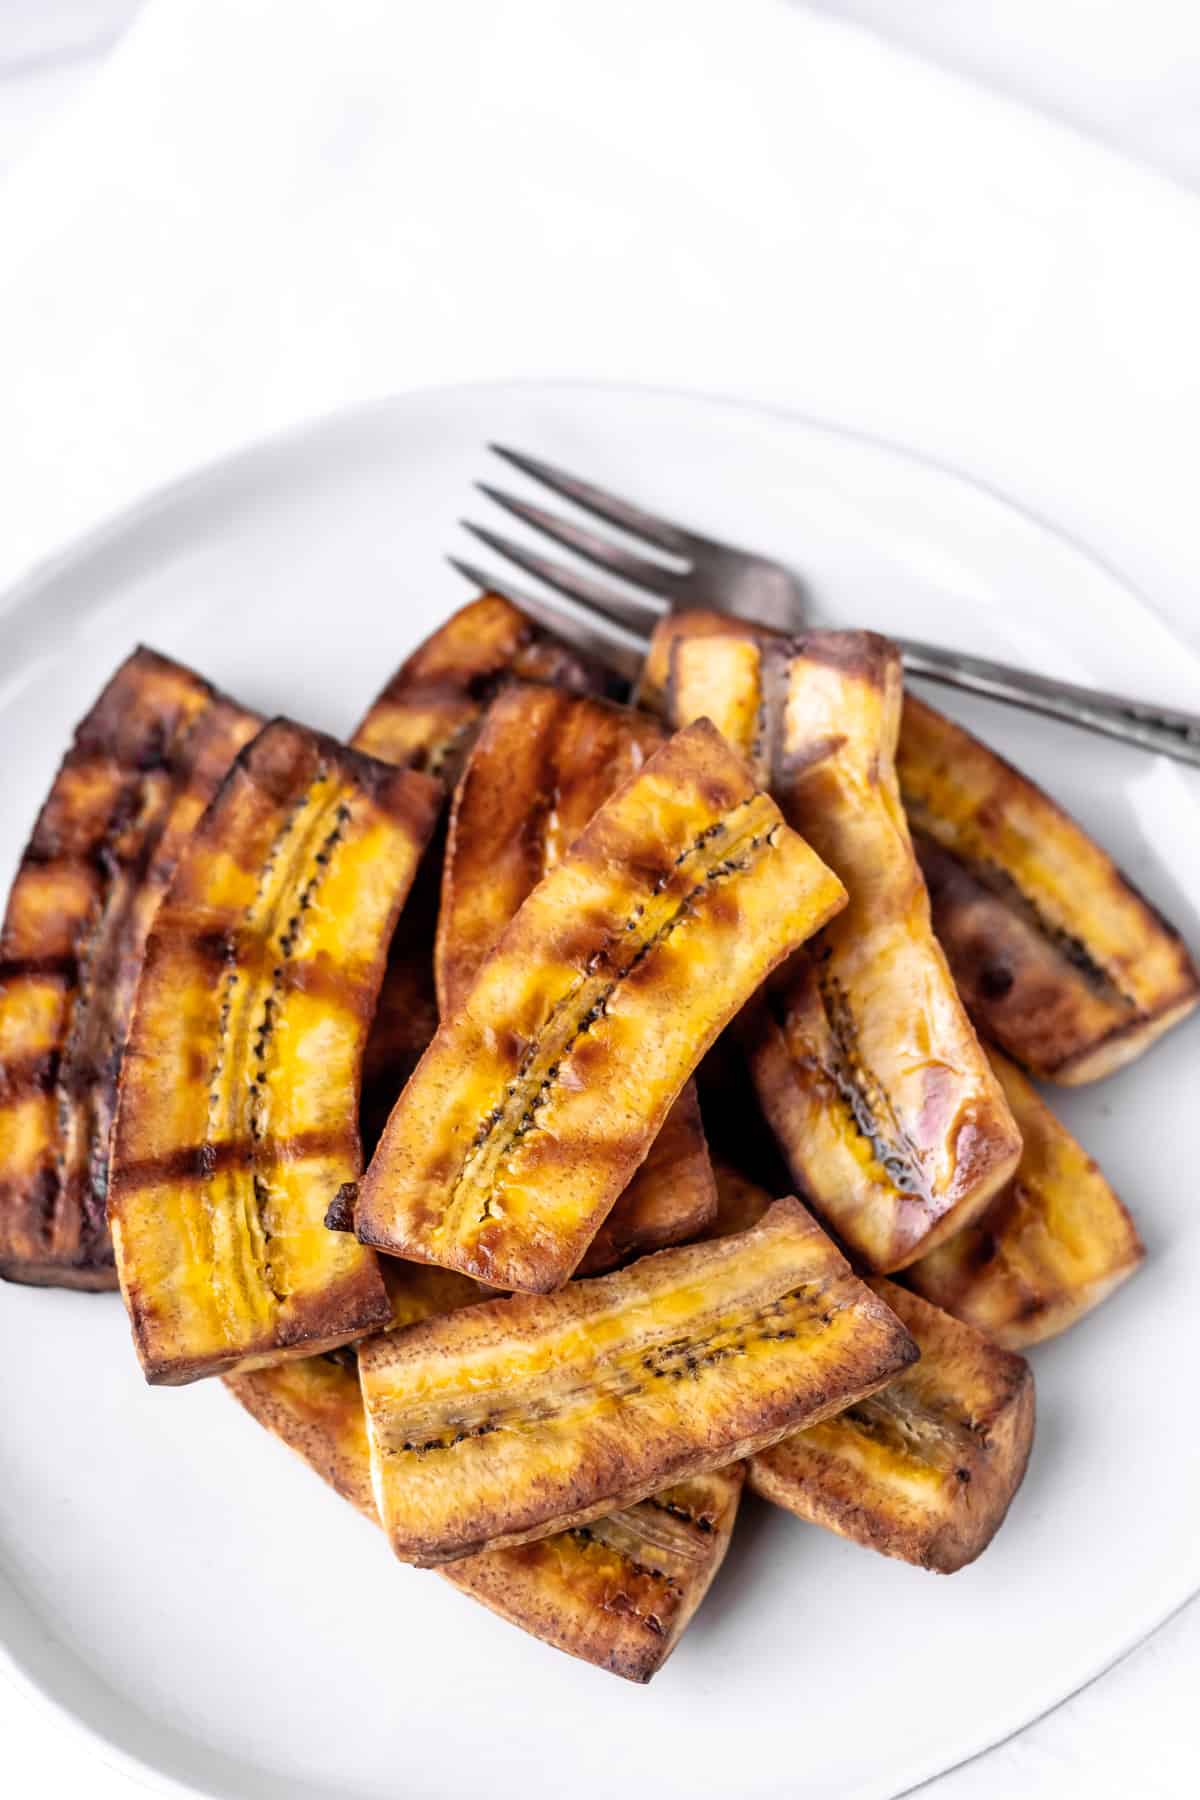 A plate of grilled plantains with a fork.